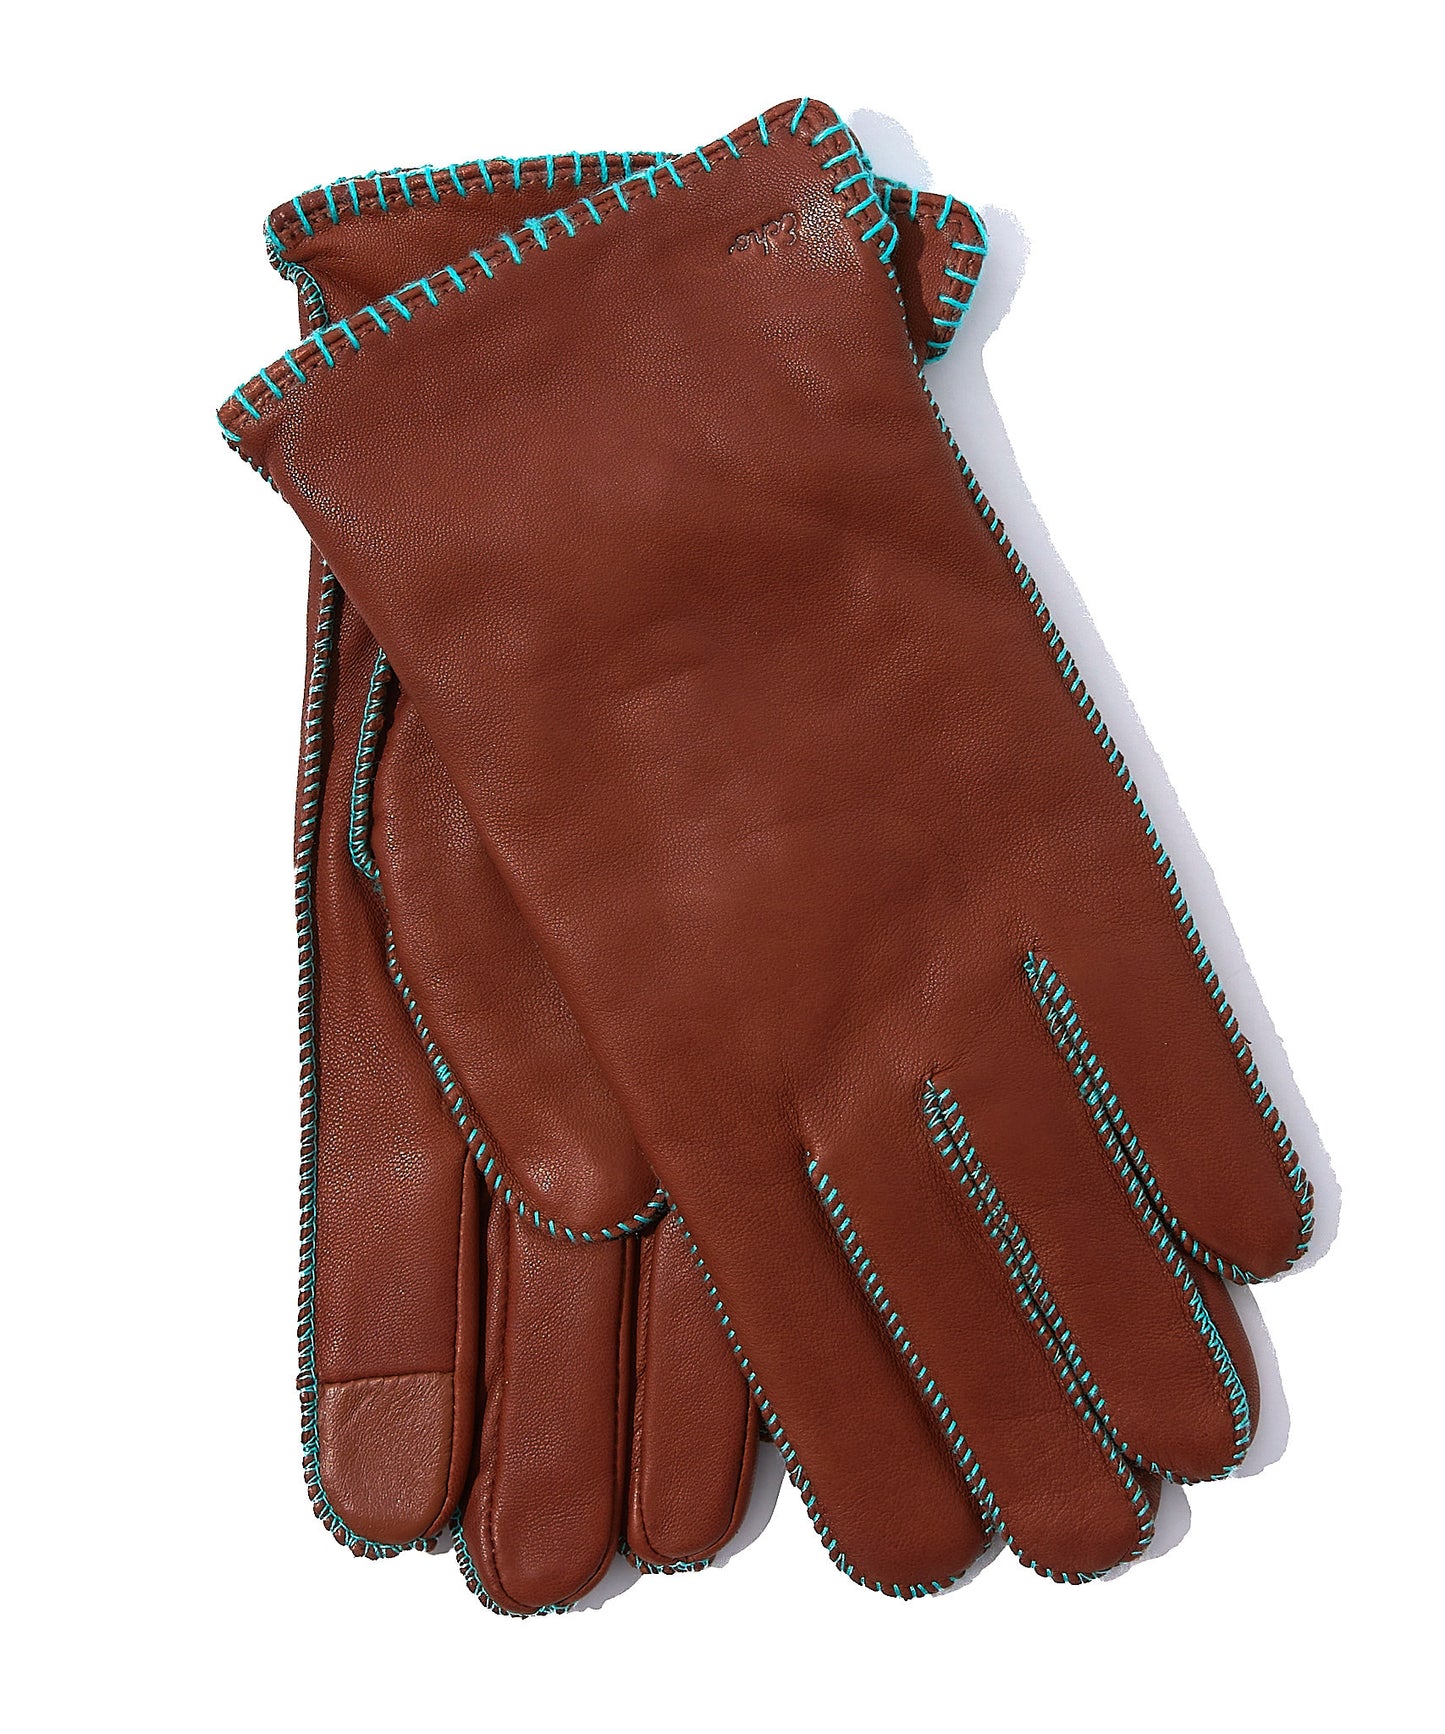 Stitched Leather Glove in color Chestnut